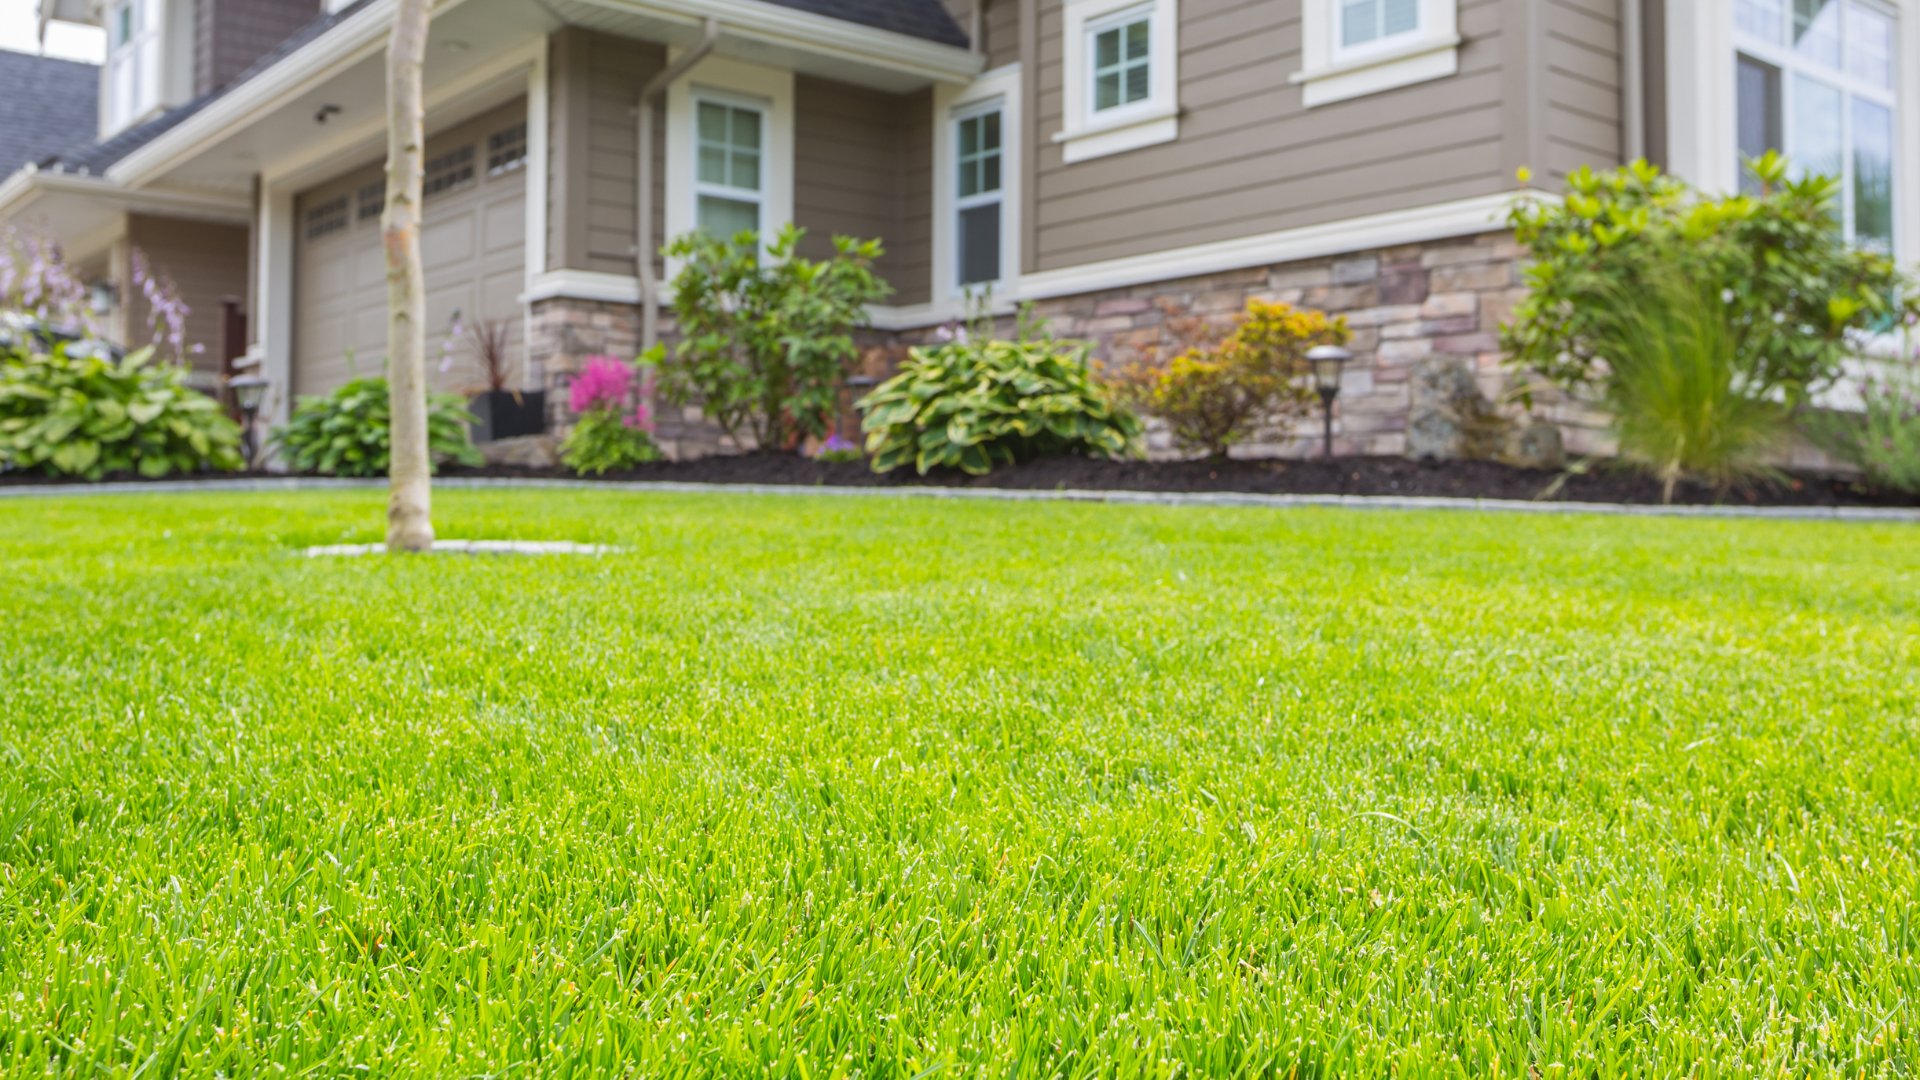 Your Grass in Austin, TX Needs These Lawn Care Services in May & June